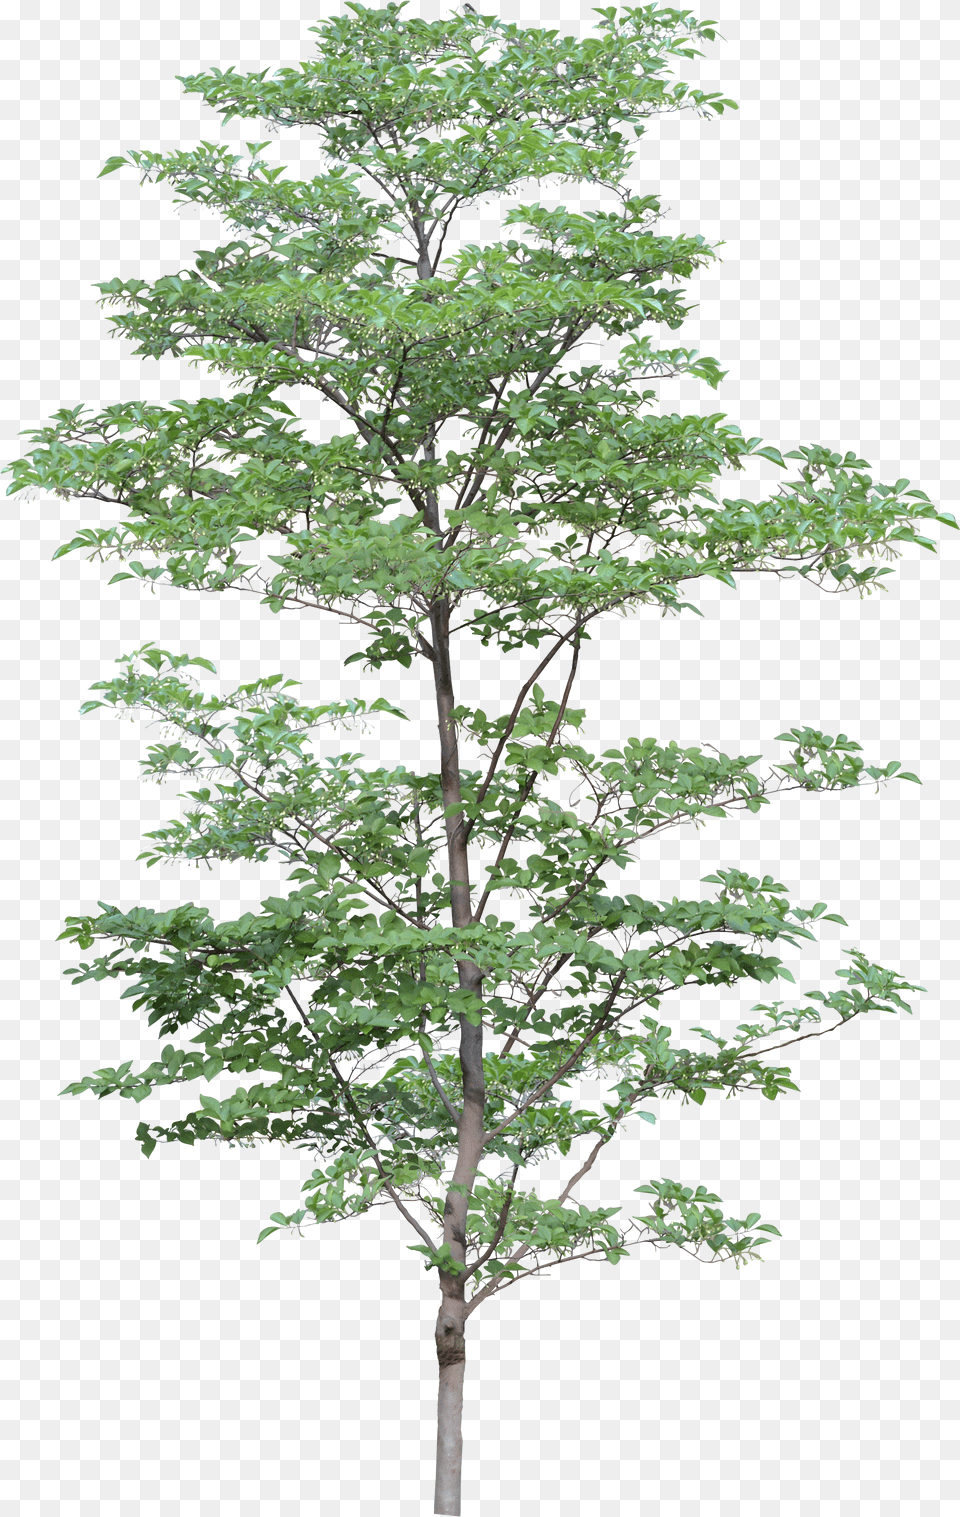 Trees For Photoshop Transparent Background Format Trees, Oak, Plant, Sycamore, Tree Png Image